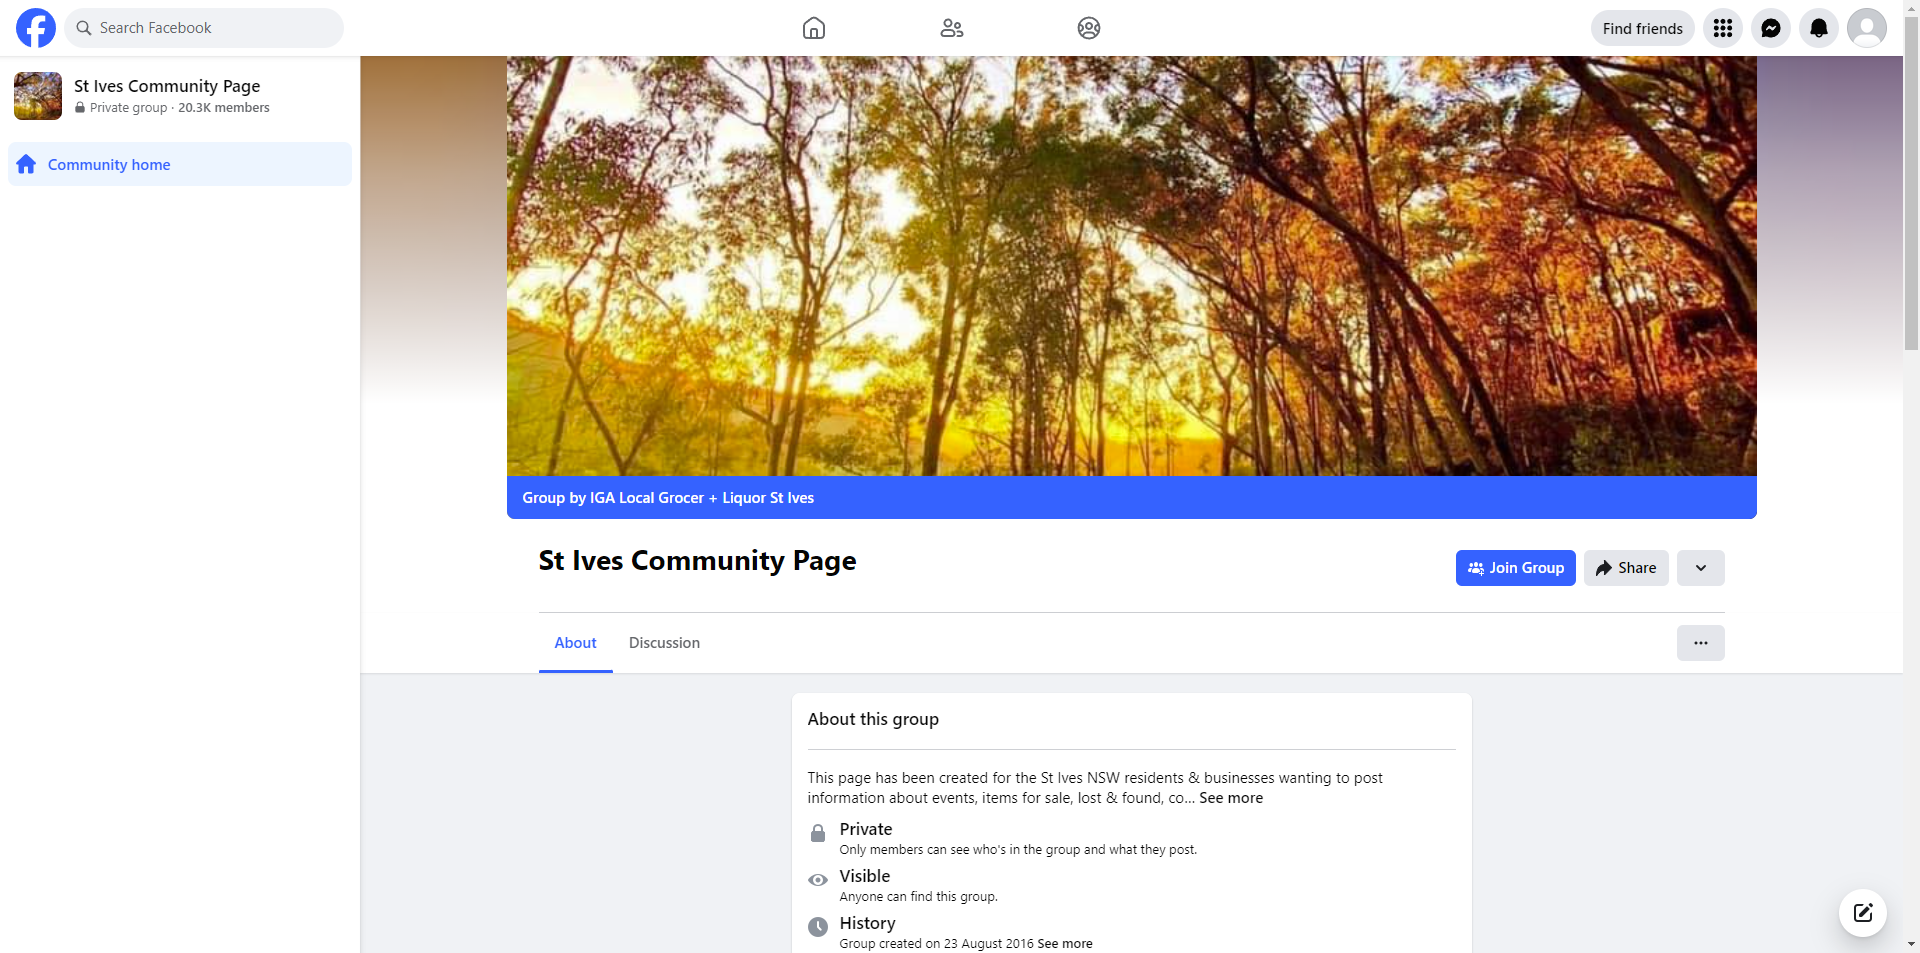 St Ives Community Page